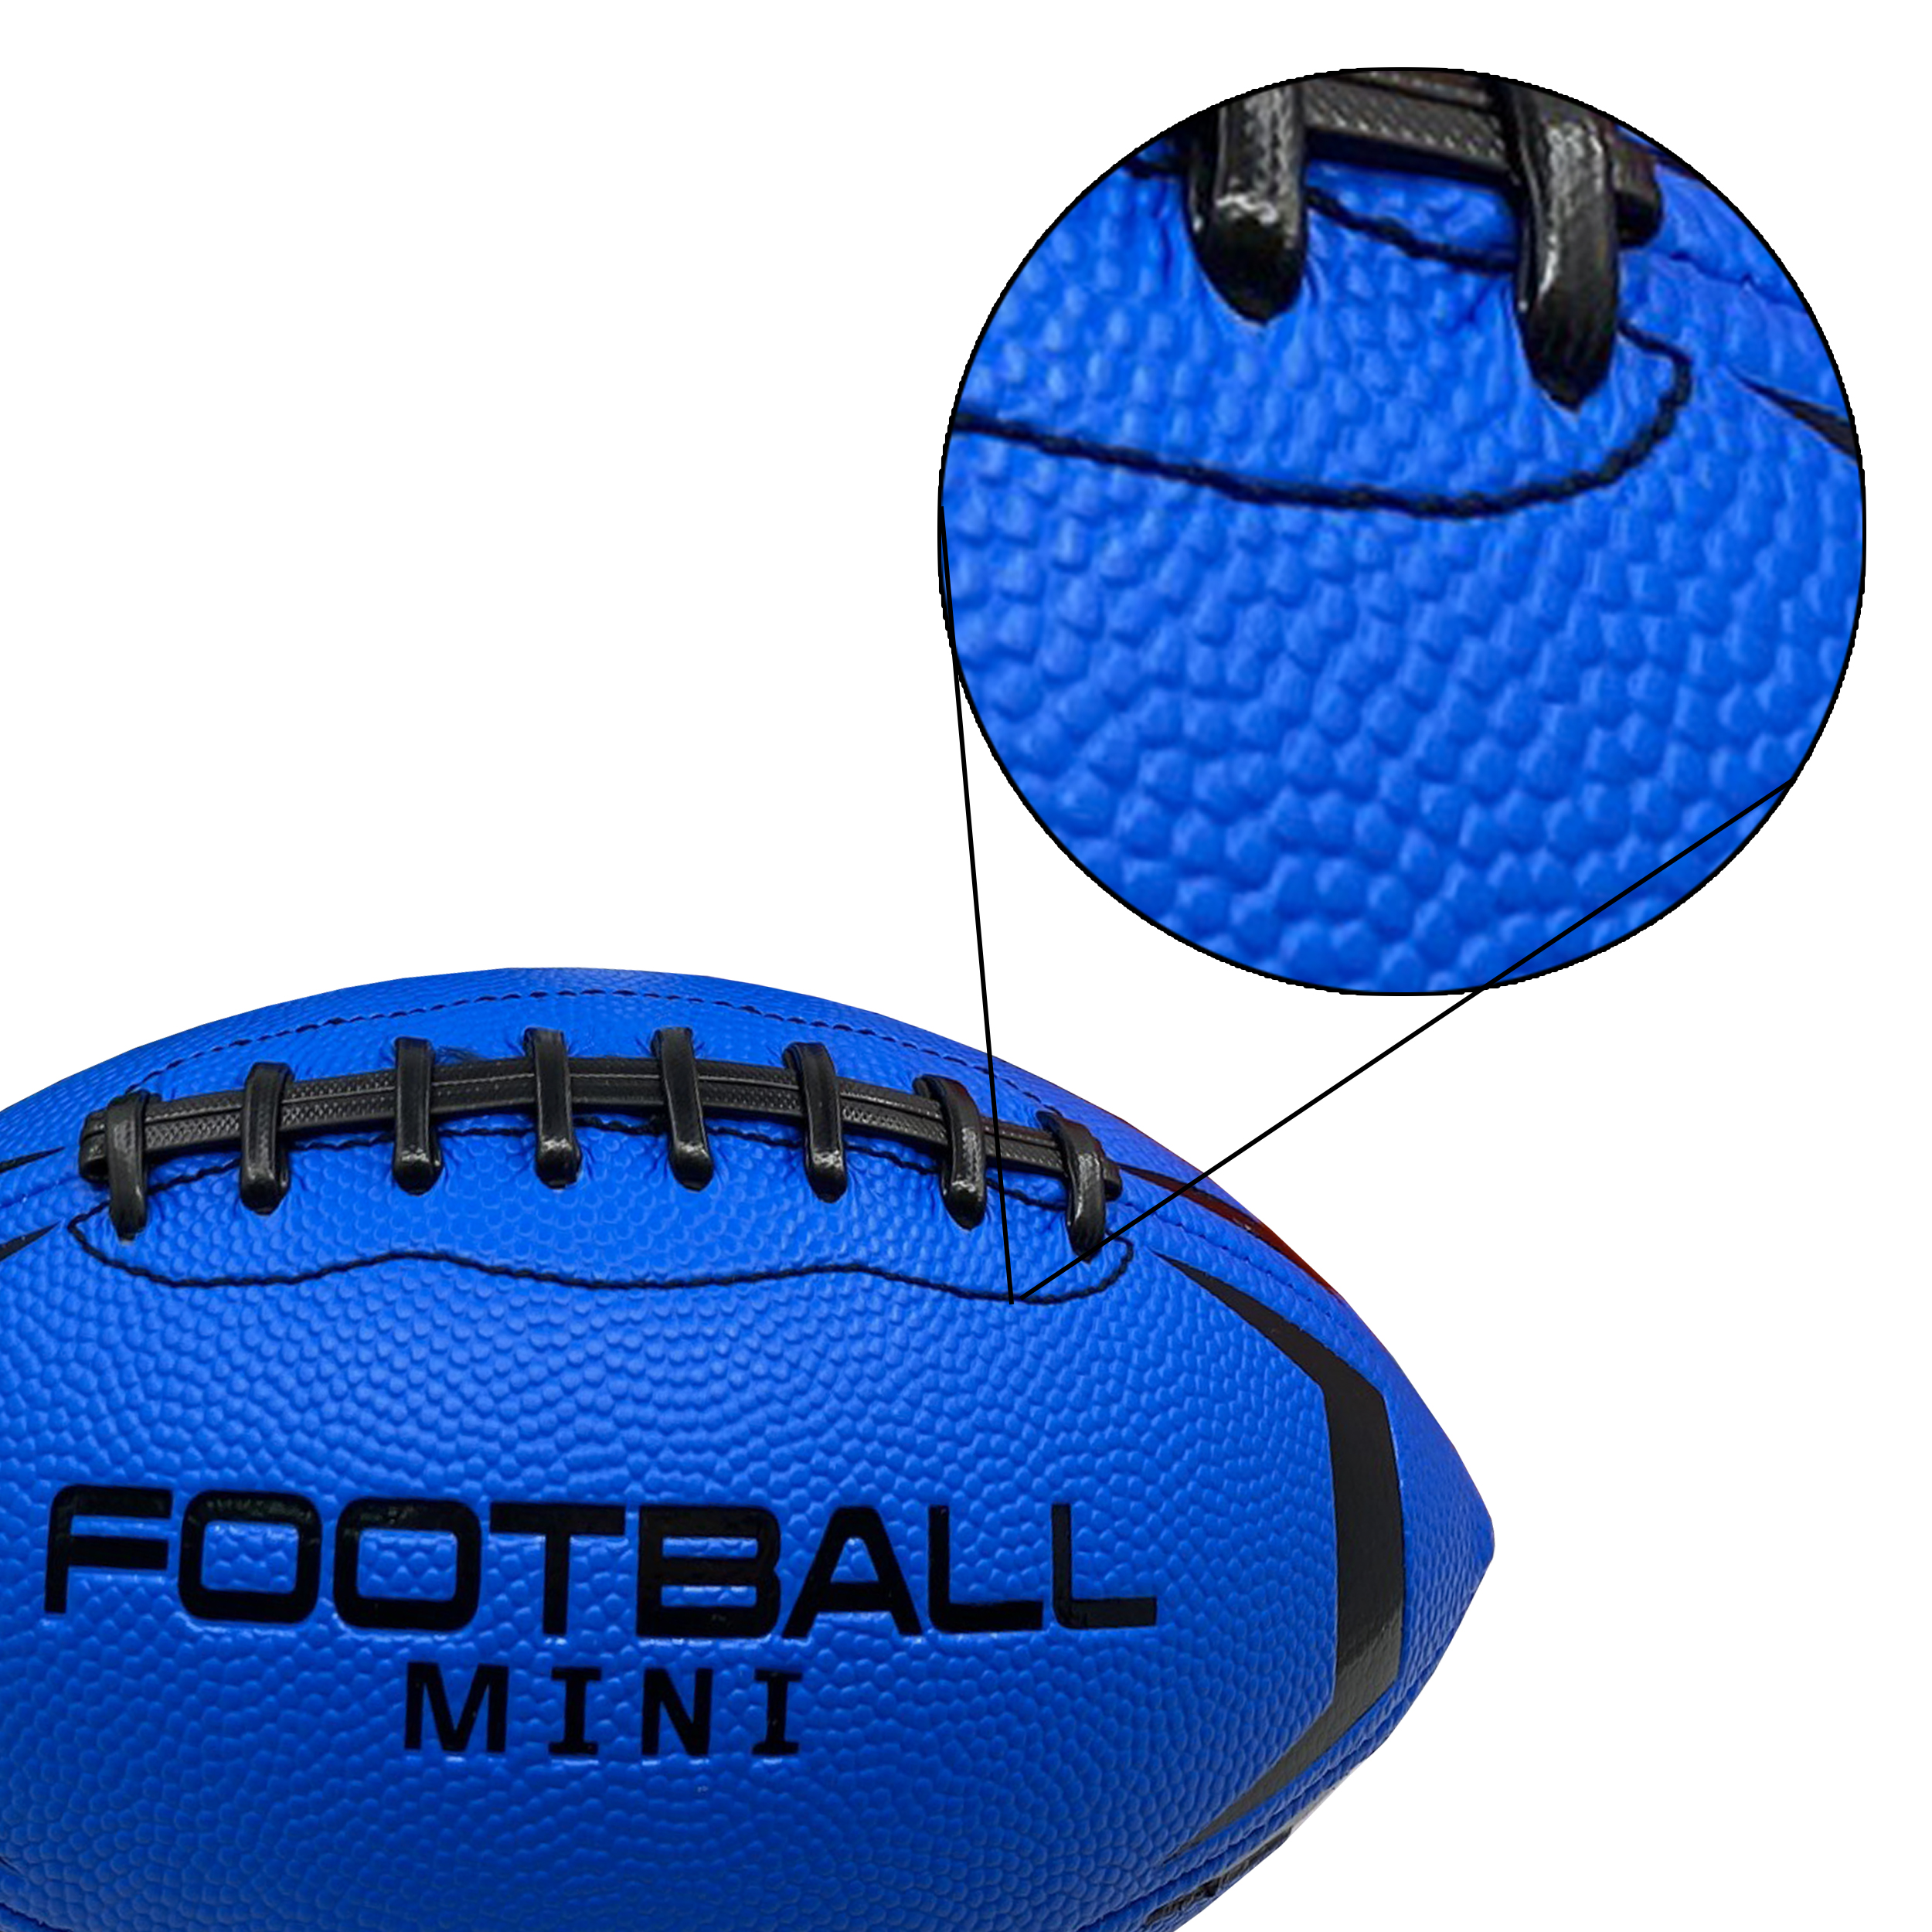 Magic Time Mini 6” Rubber Football Toy Ball, Kids Teen, Unisex, Assorted Colors Black, Red, Blue - image 4 of 7